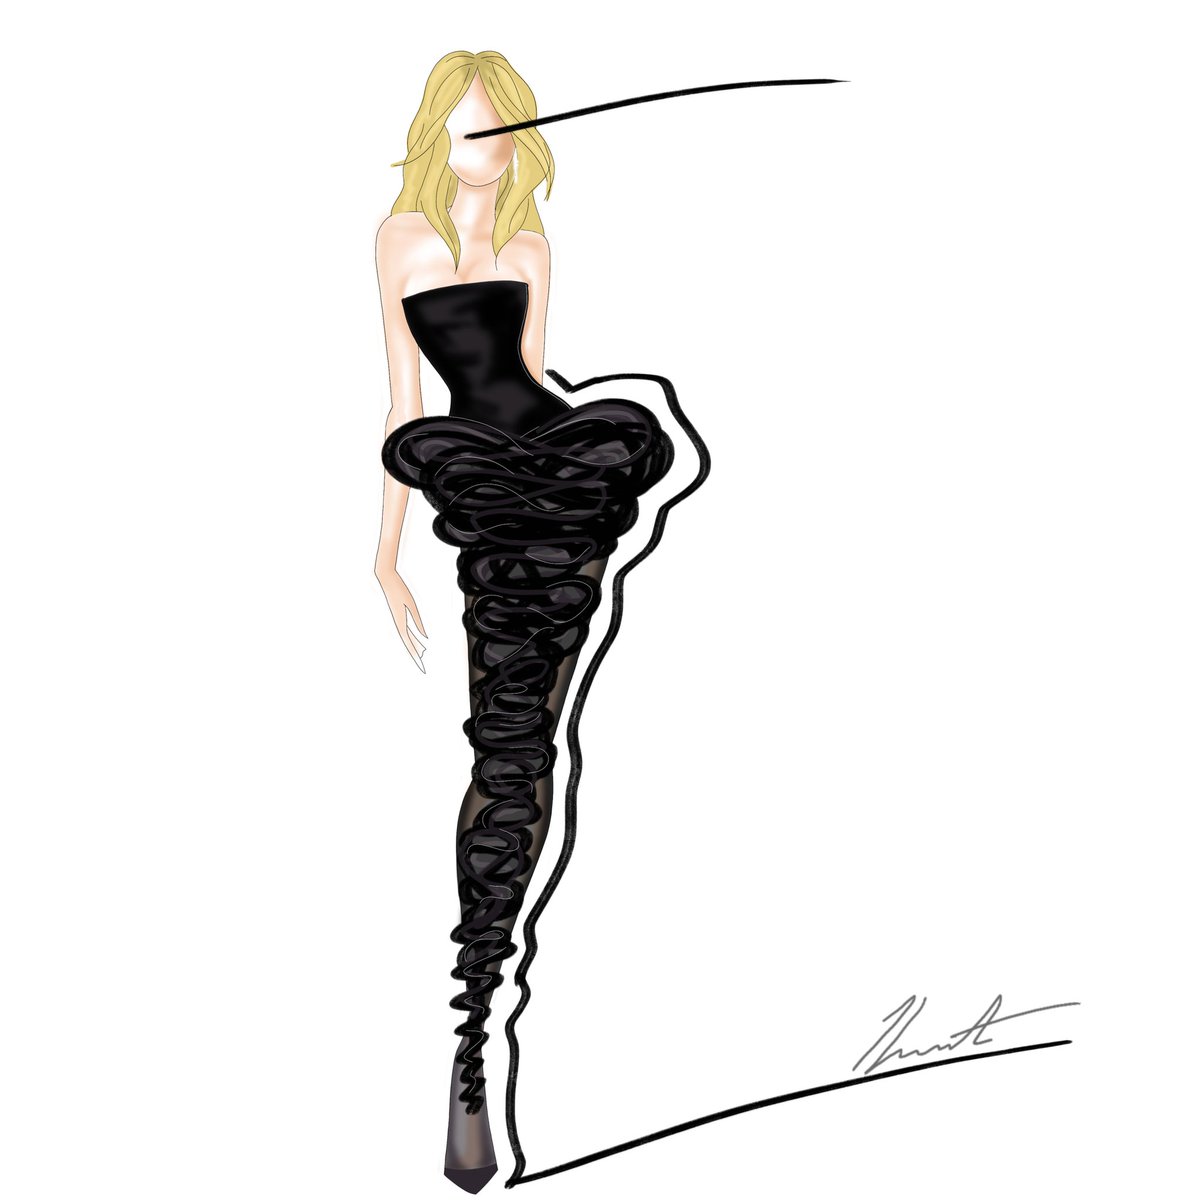 Global Icon @kylieminogue on the @BRITs red carpet 

#KylieMinogue #Brits #BritAwards #GlobalIcon #FashionIllustration